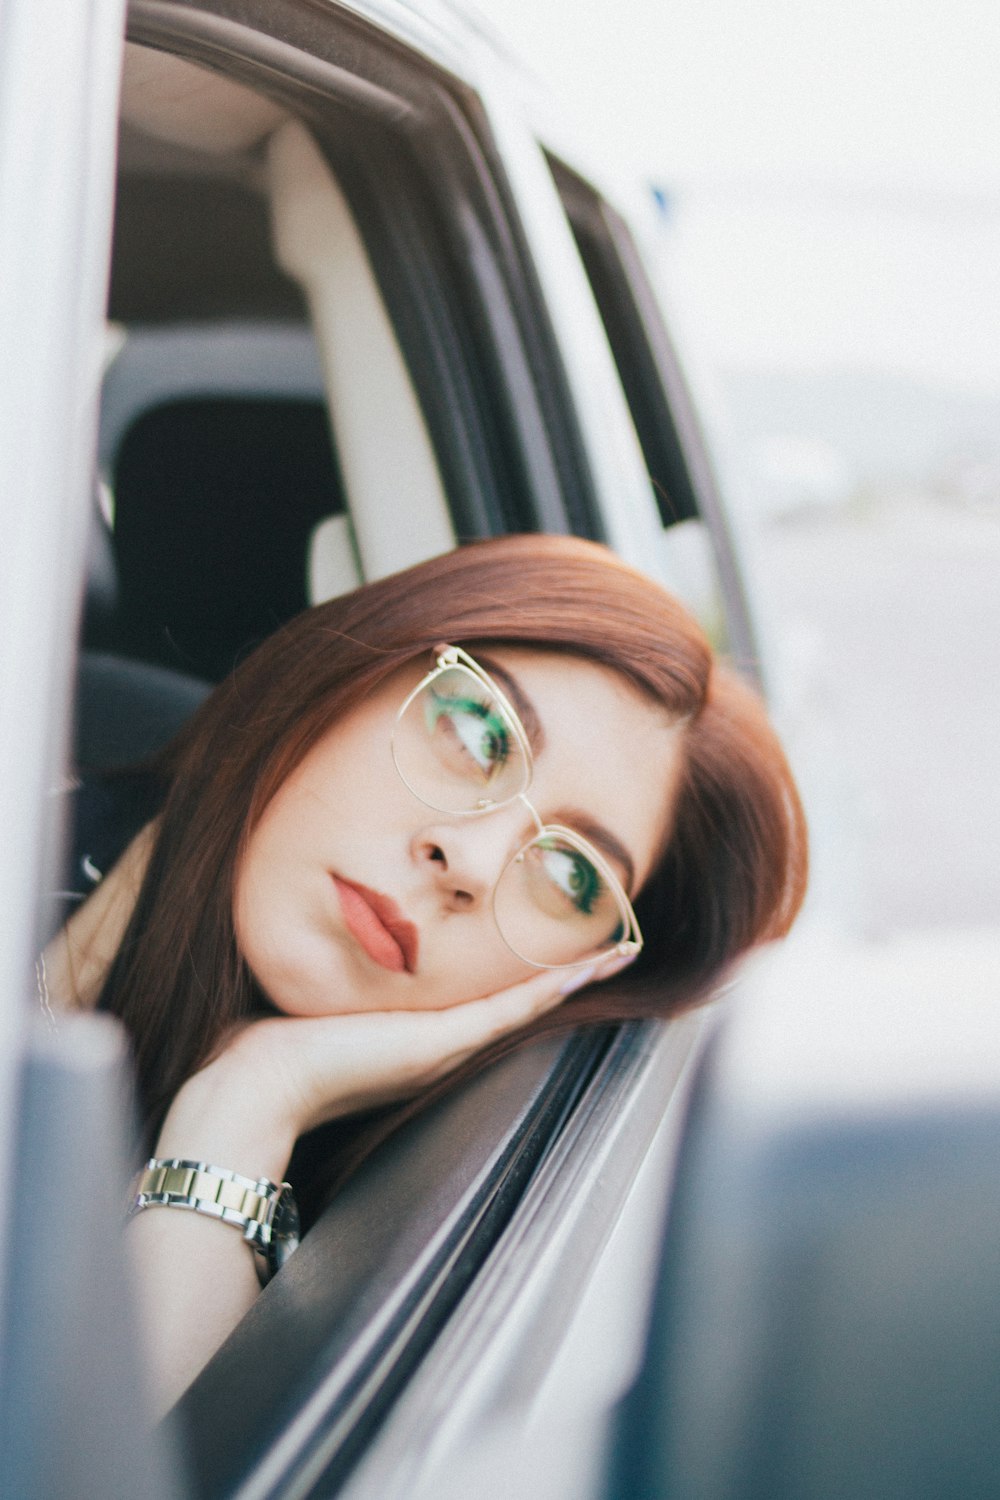 a woman with glasses sitting in a car